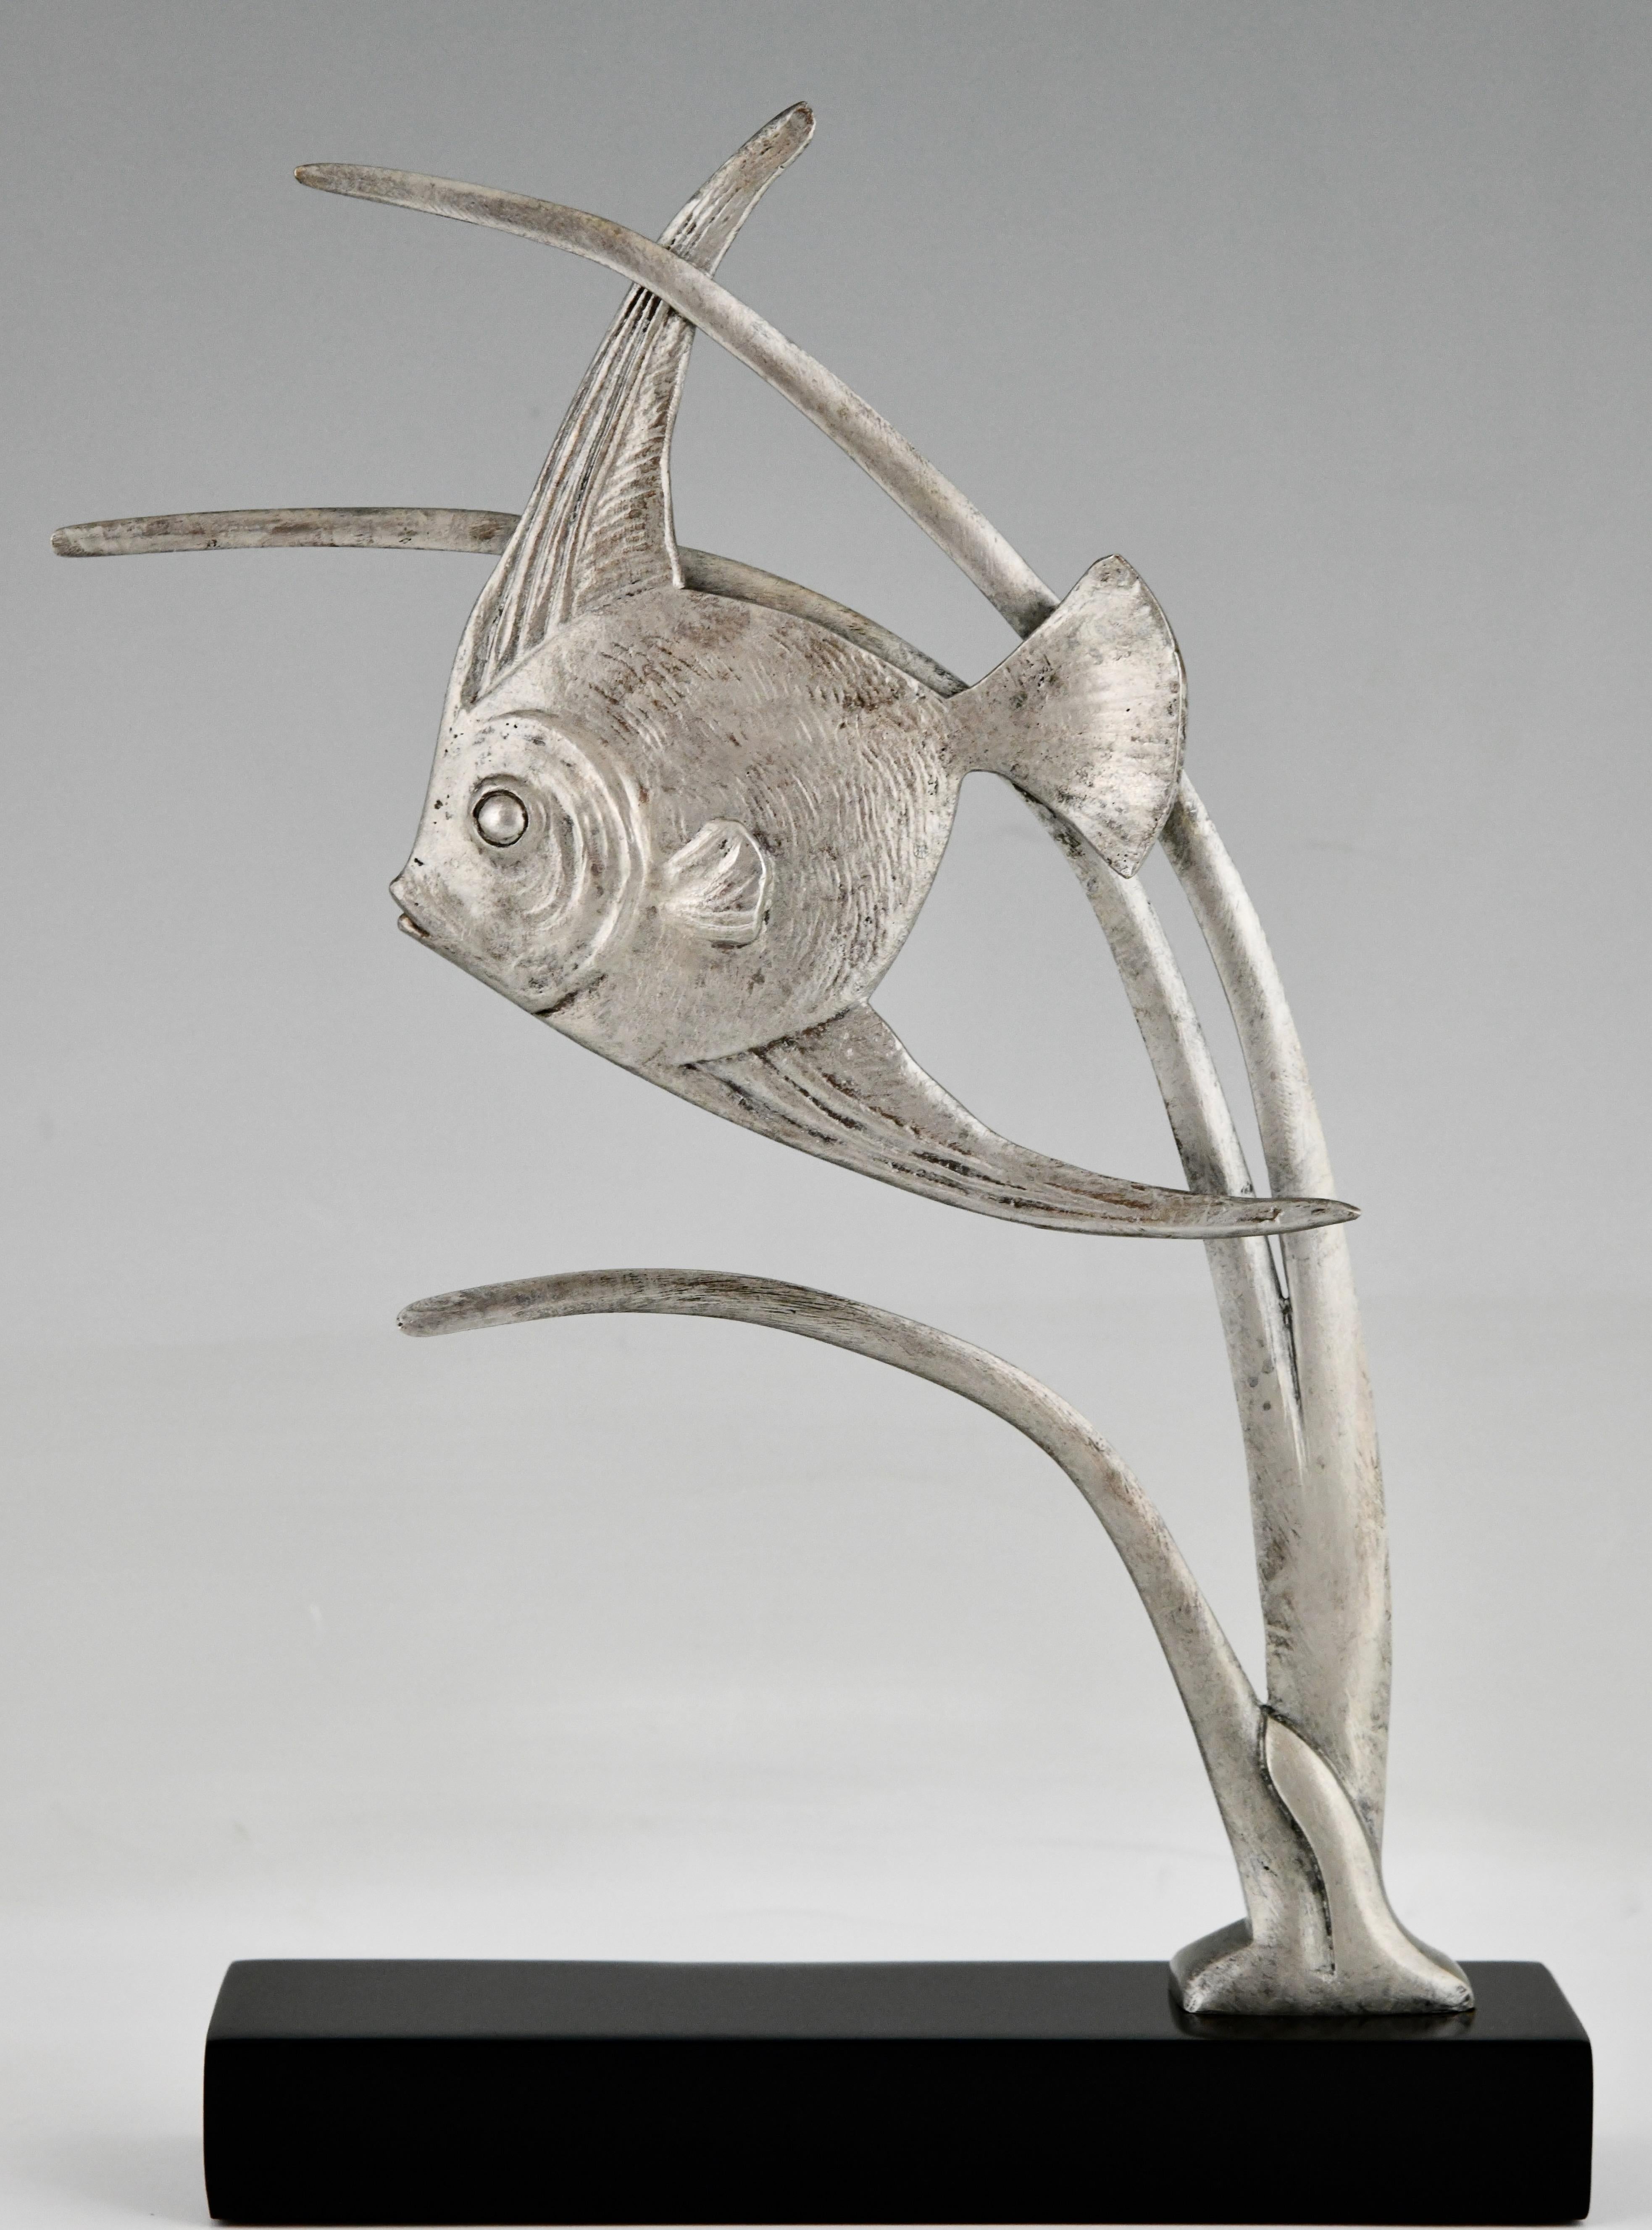 Art Deco bronze sculpture of a fish signed by De Roche. 
Bronze with silver patina on a Belgian Black marble base. 
France 1930.